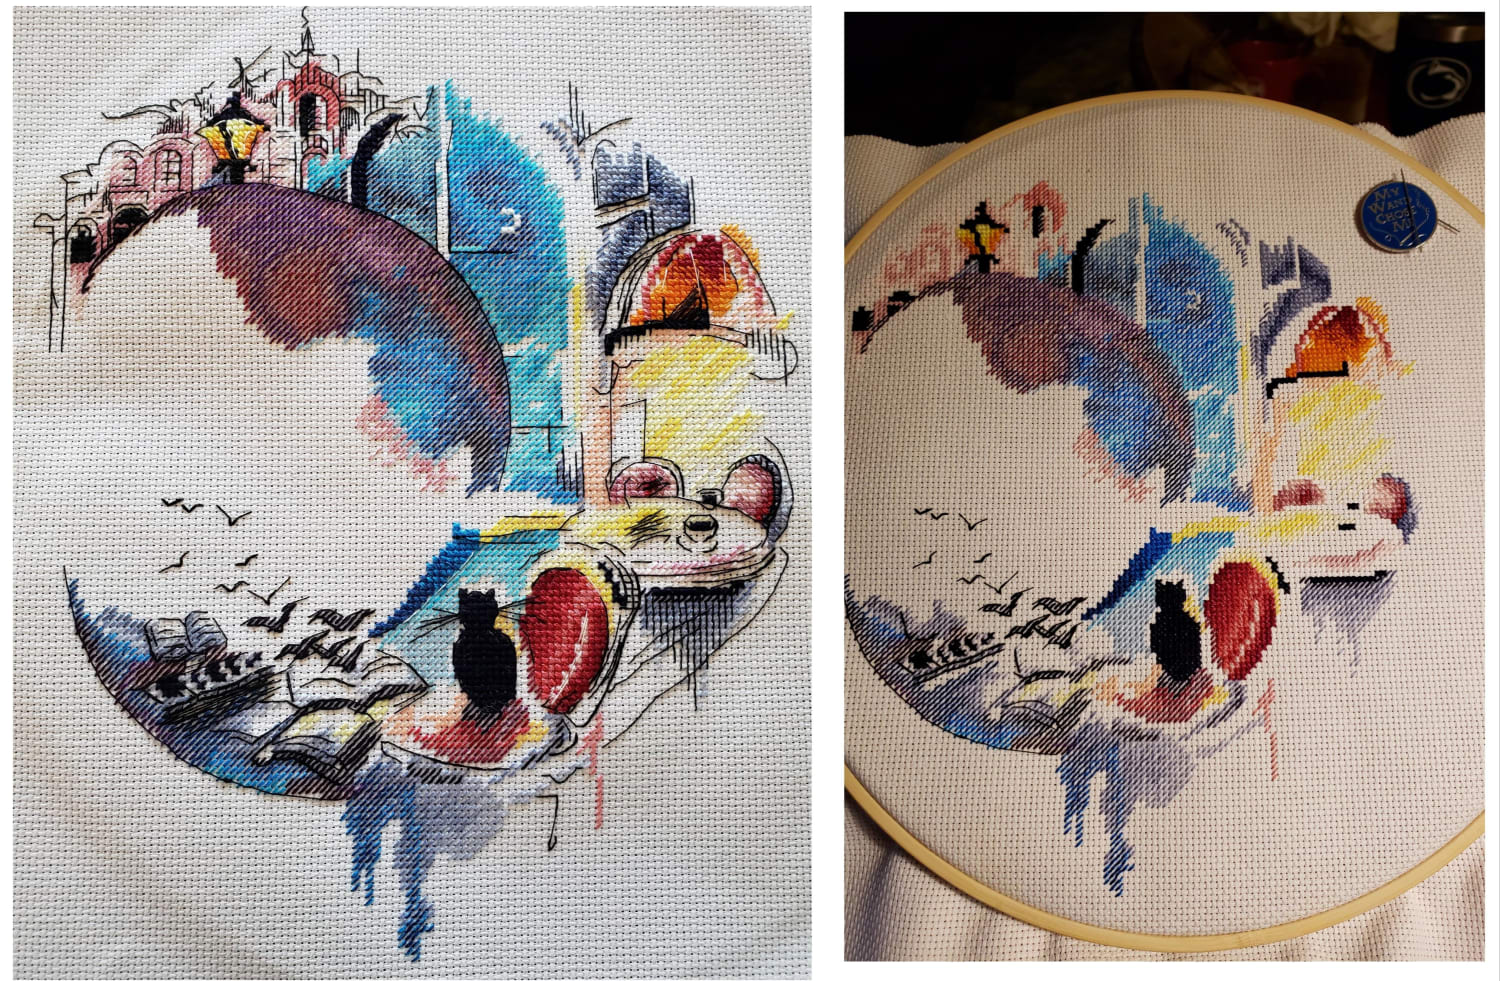 [FO] Another before and after backstitch for you guys. Went a little outside my comfort zone but I think it turned out nice.